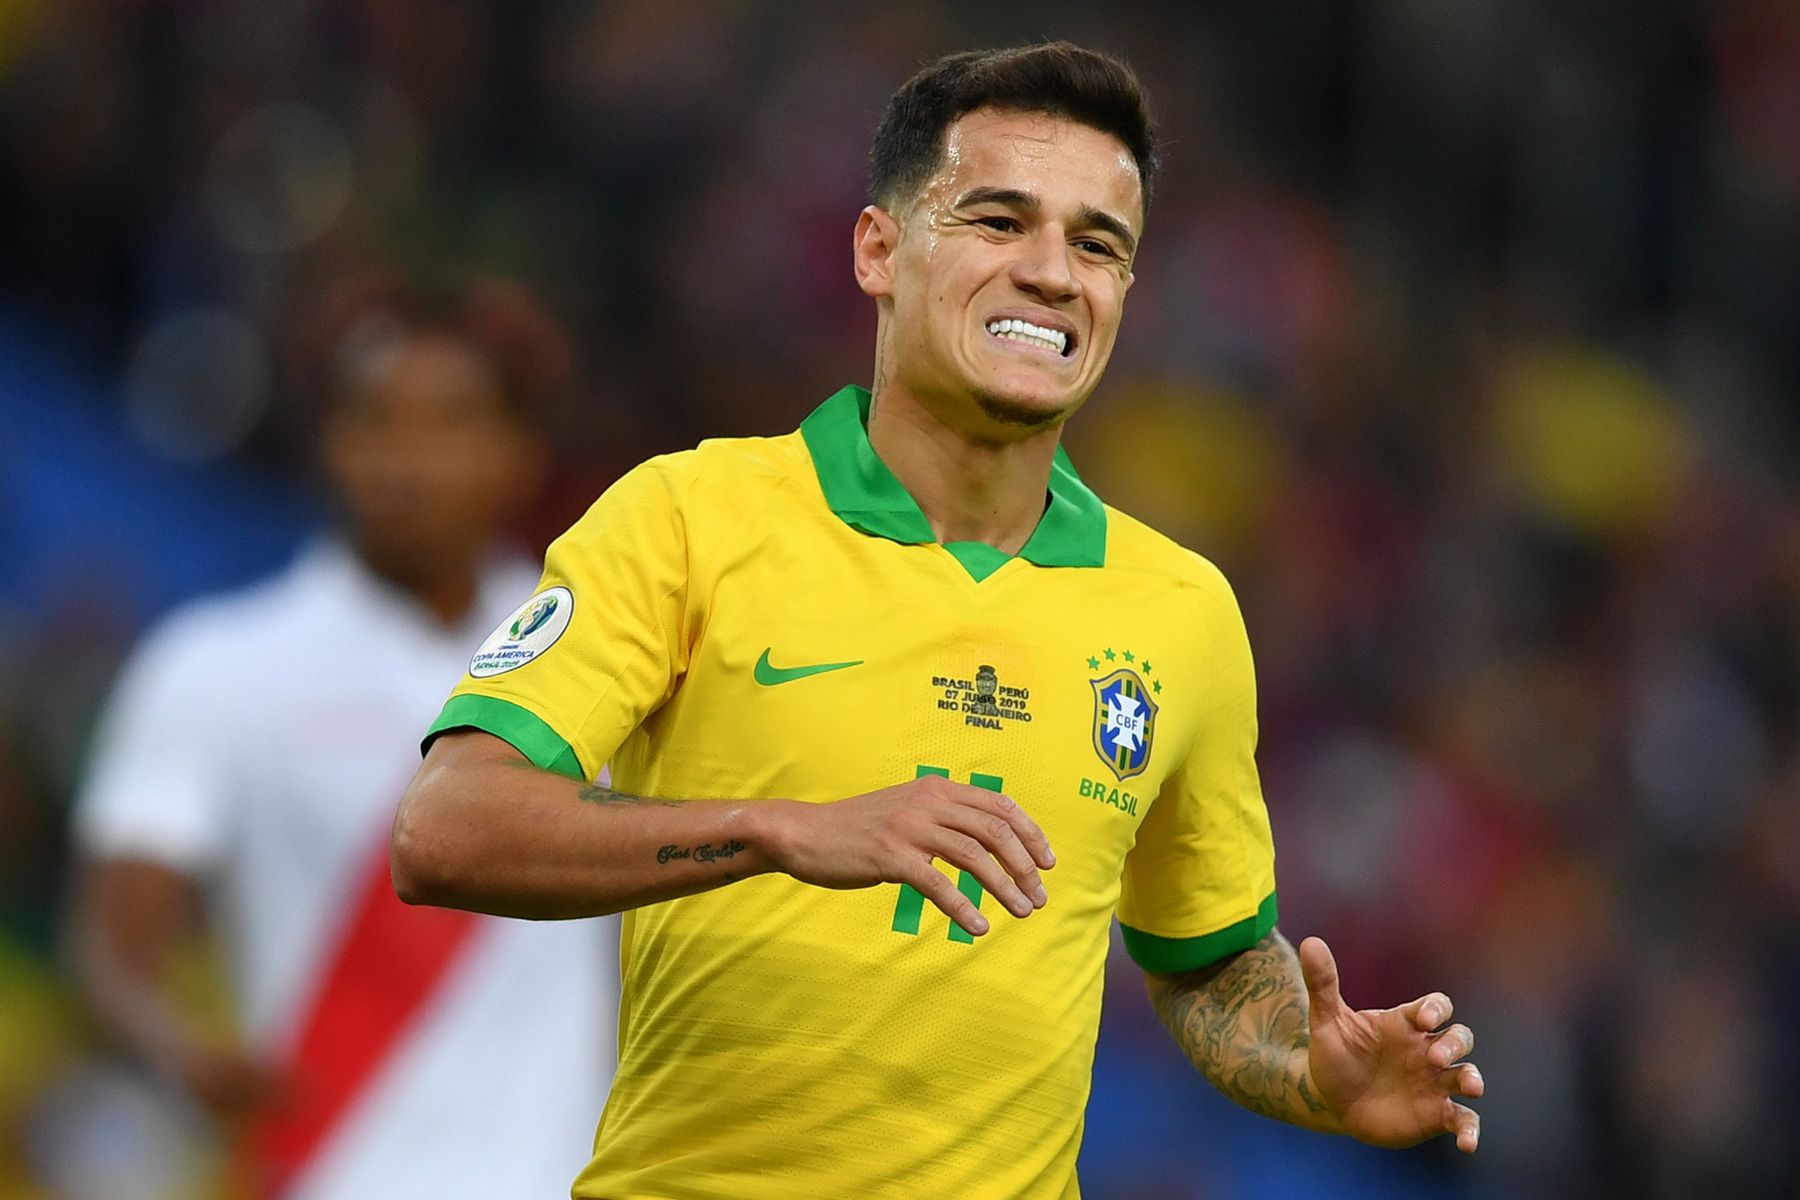 Coutinho in a match with the Brazil national team